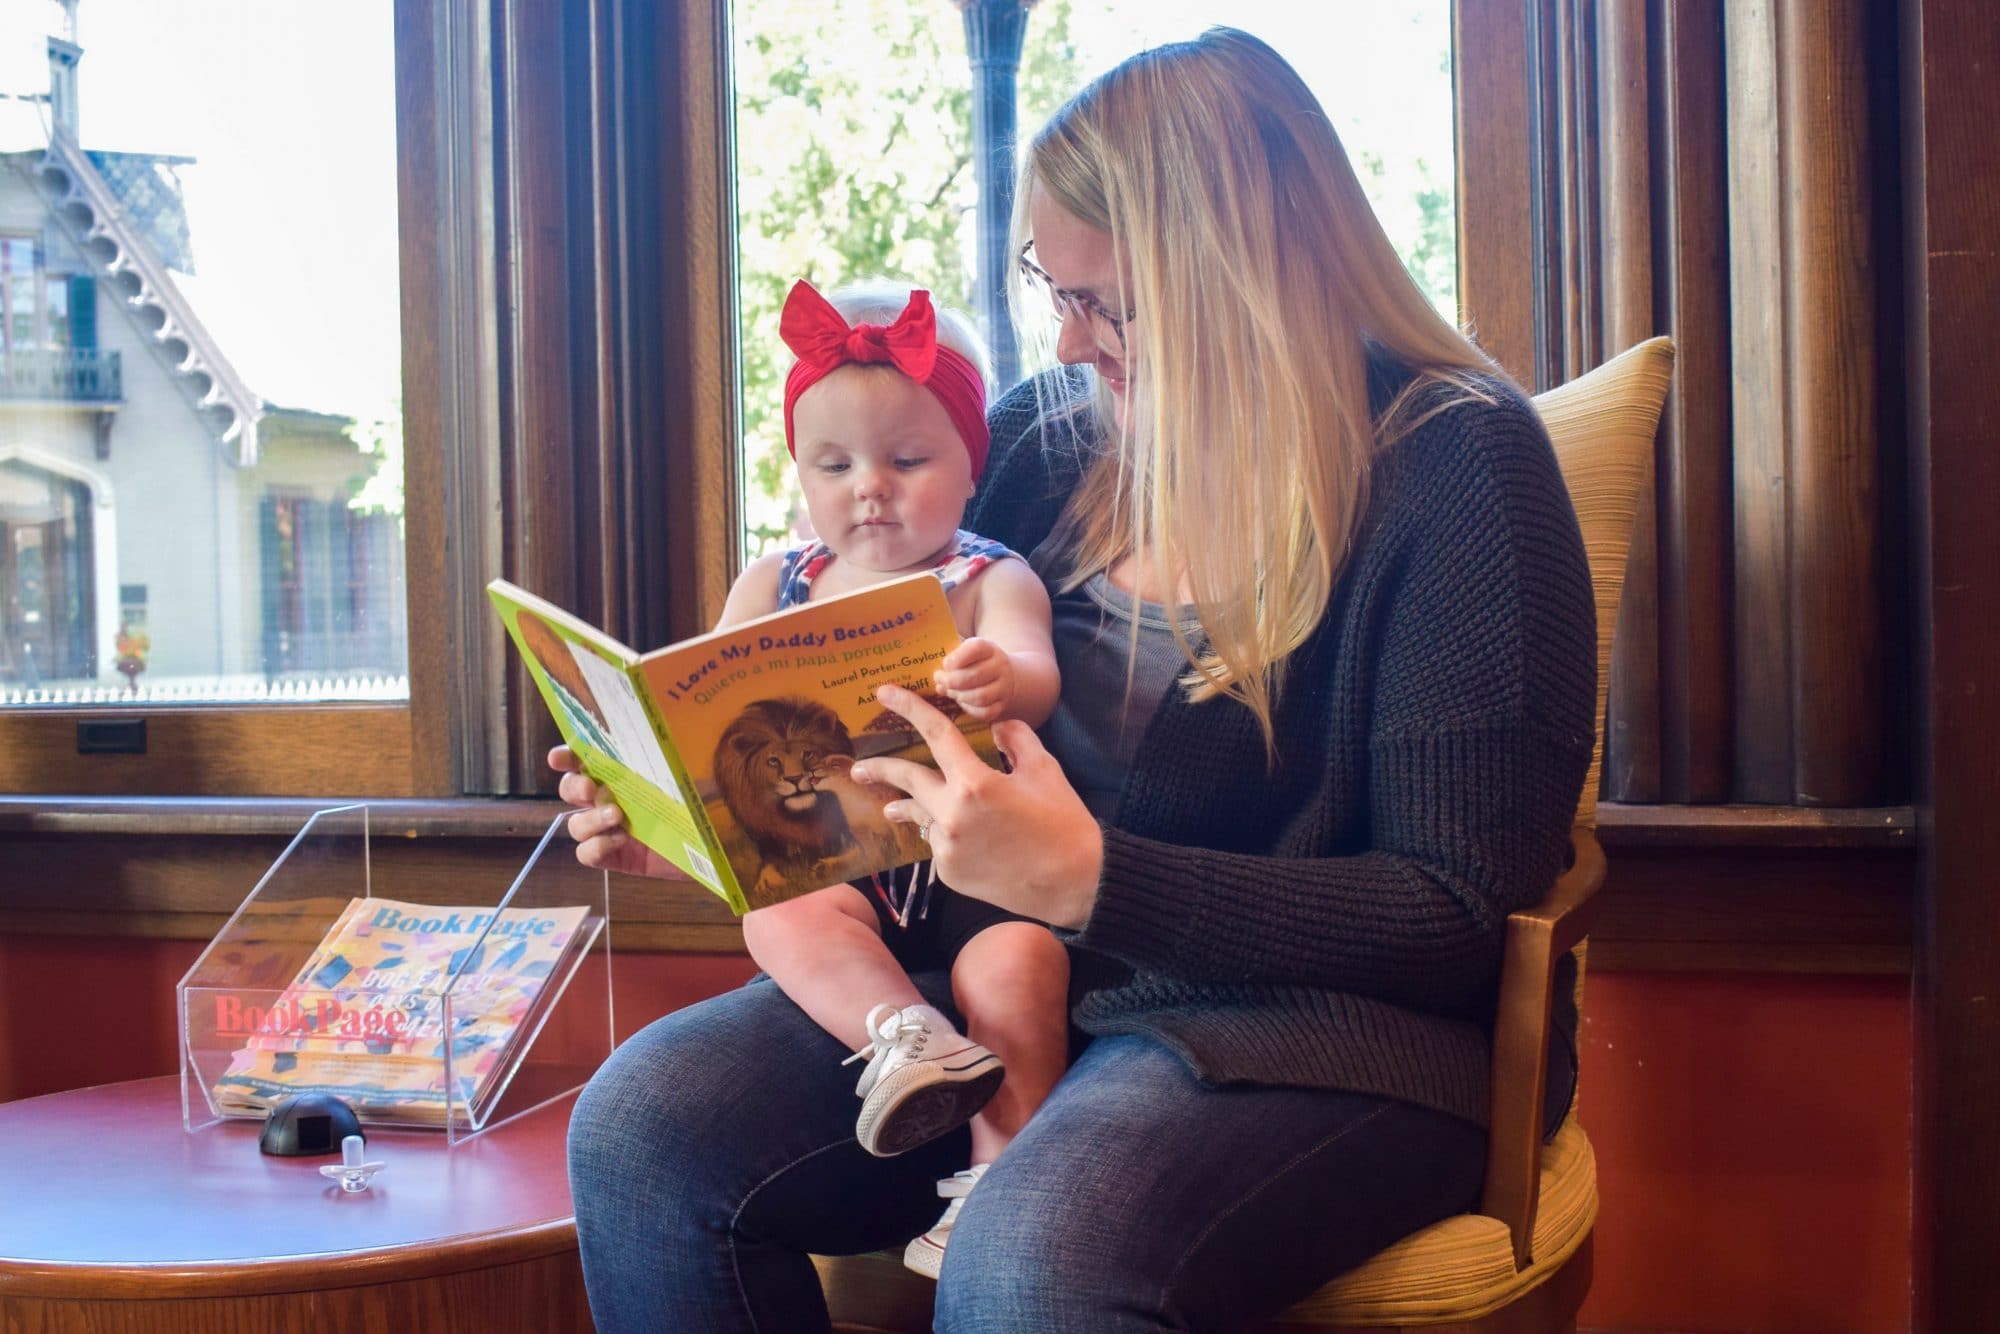 Woman participates in the Dolly Parton Imagination Library and reads a book to a baby sitting on her lap